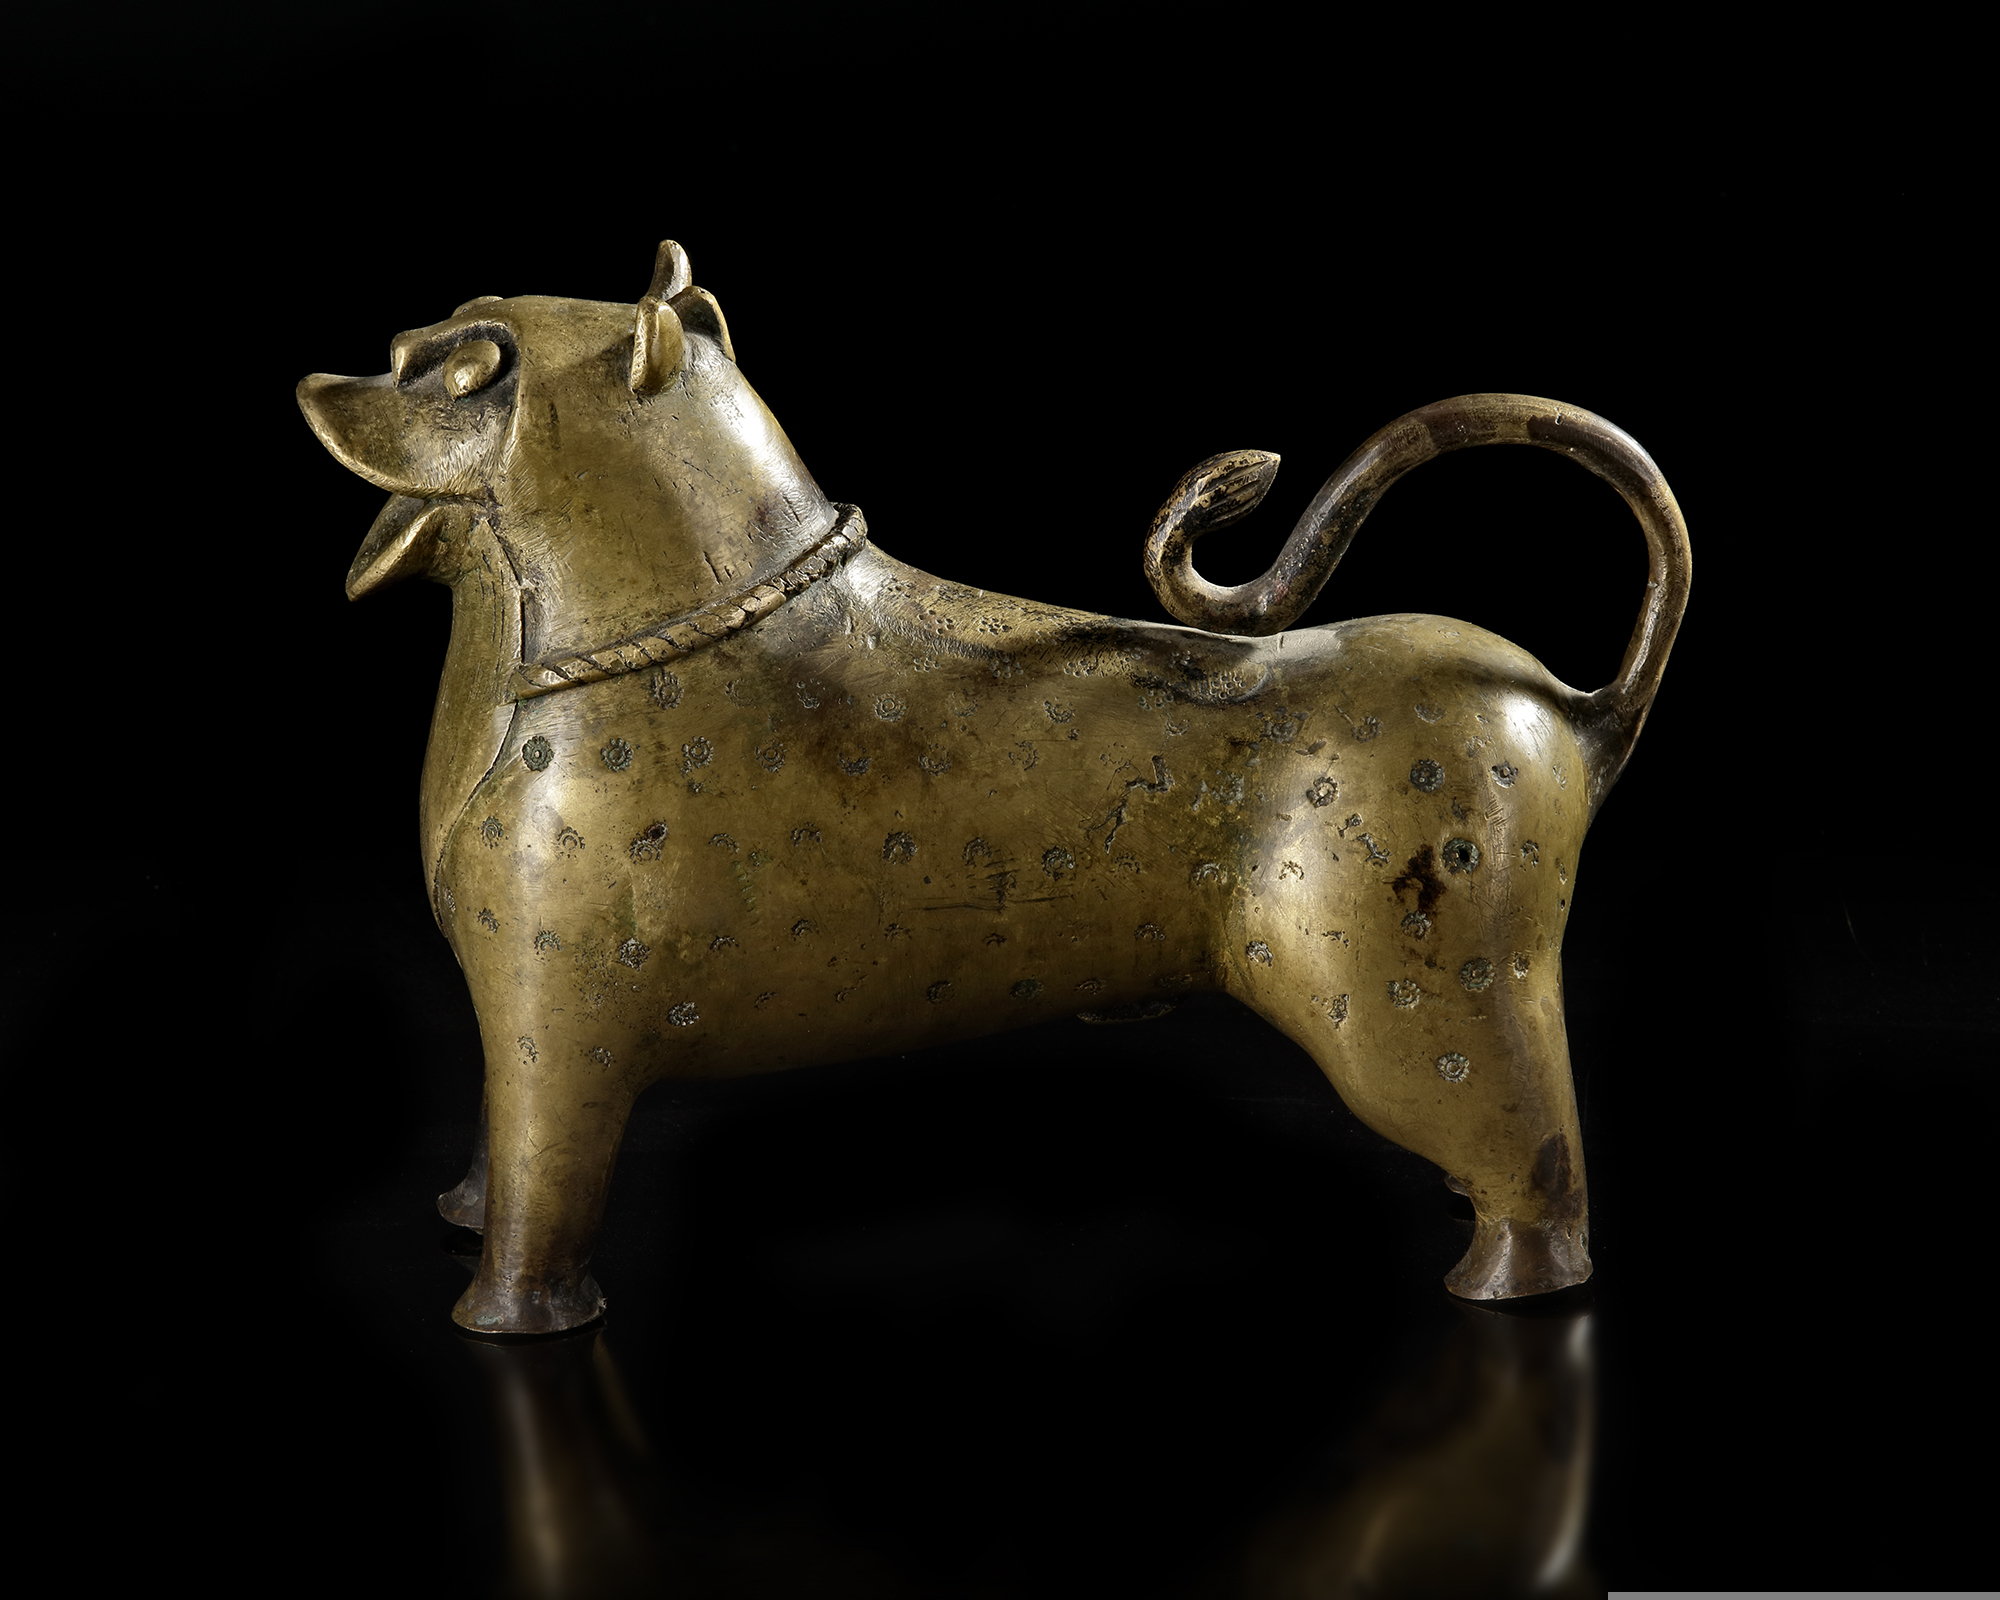 A MUGHAL BRASS INCENSE BURNER IN THE FORM OF A LION, INDIA, 17TH CENTURY - Image 3 of 4